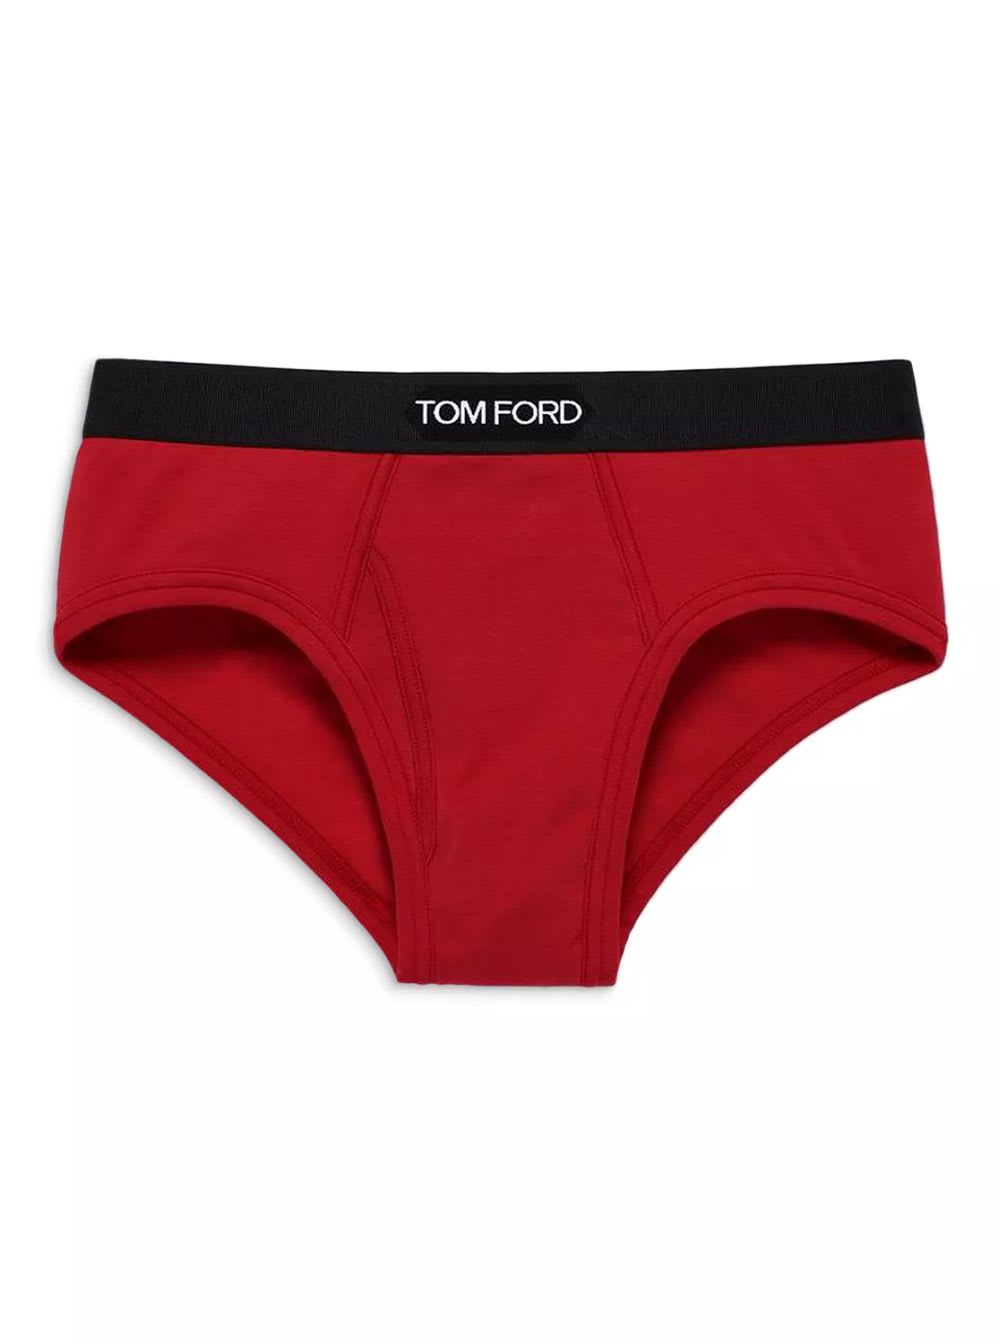 TOM FORD MAN S BICOLOR COTTON BRIEFS WITH LOGO